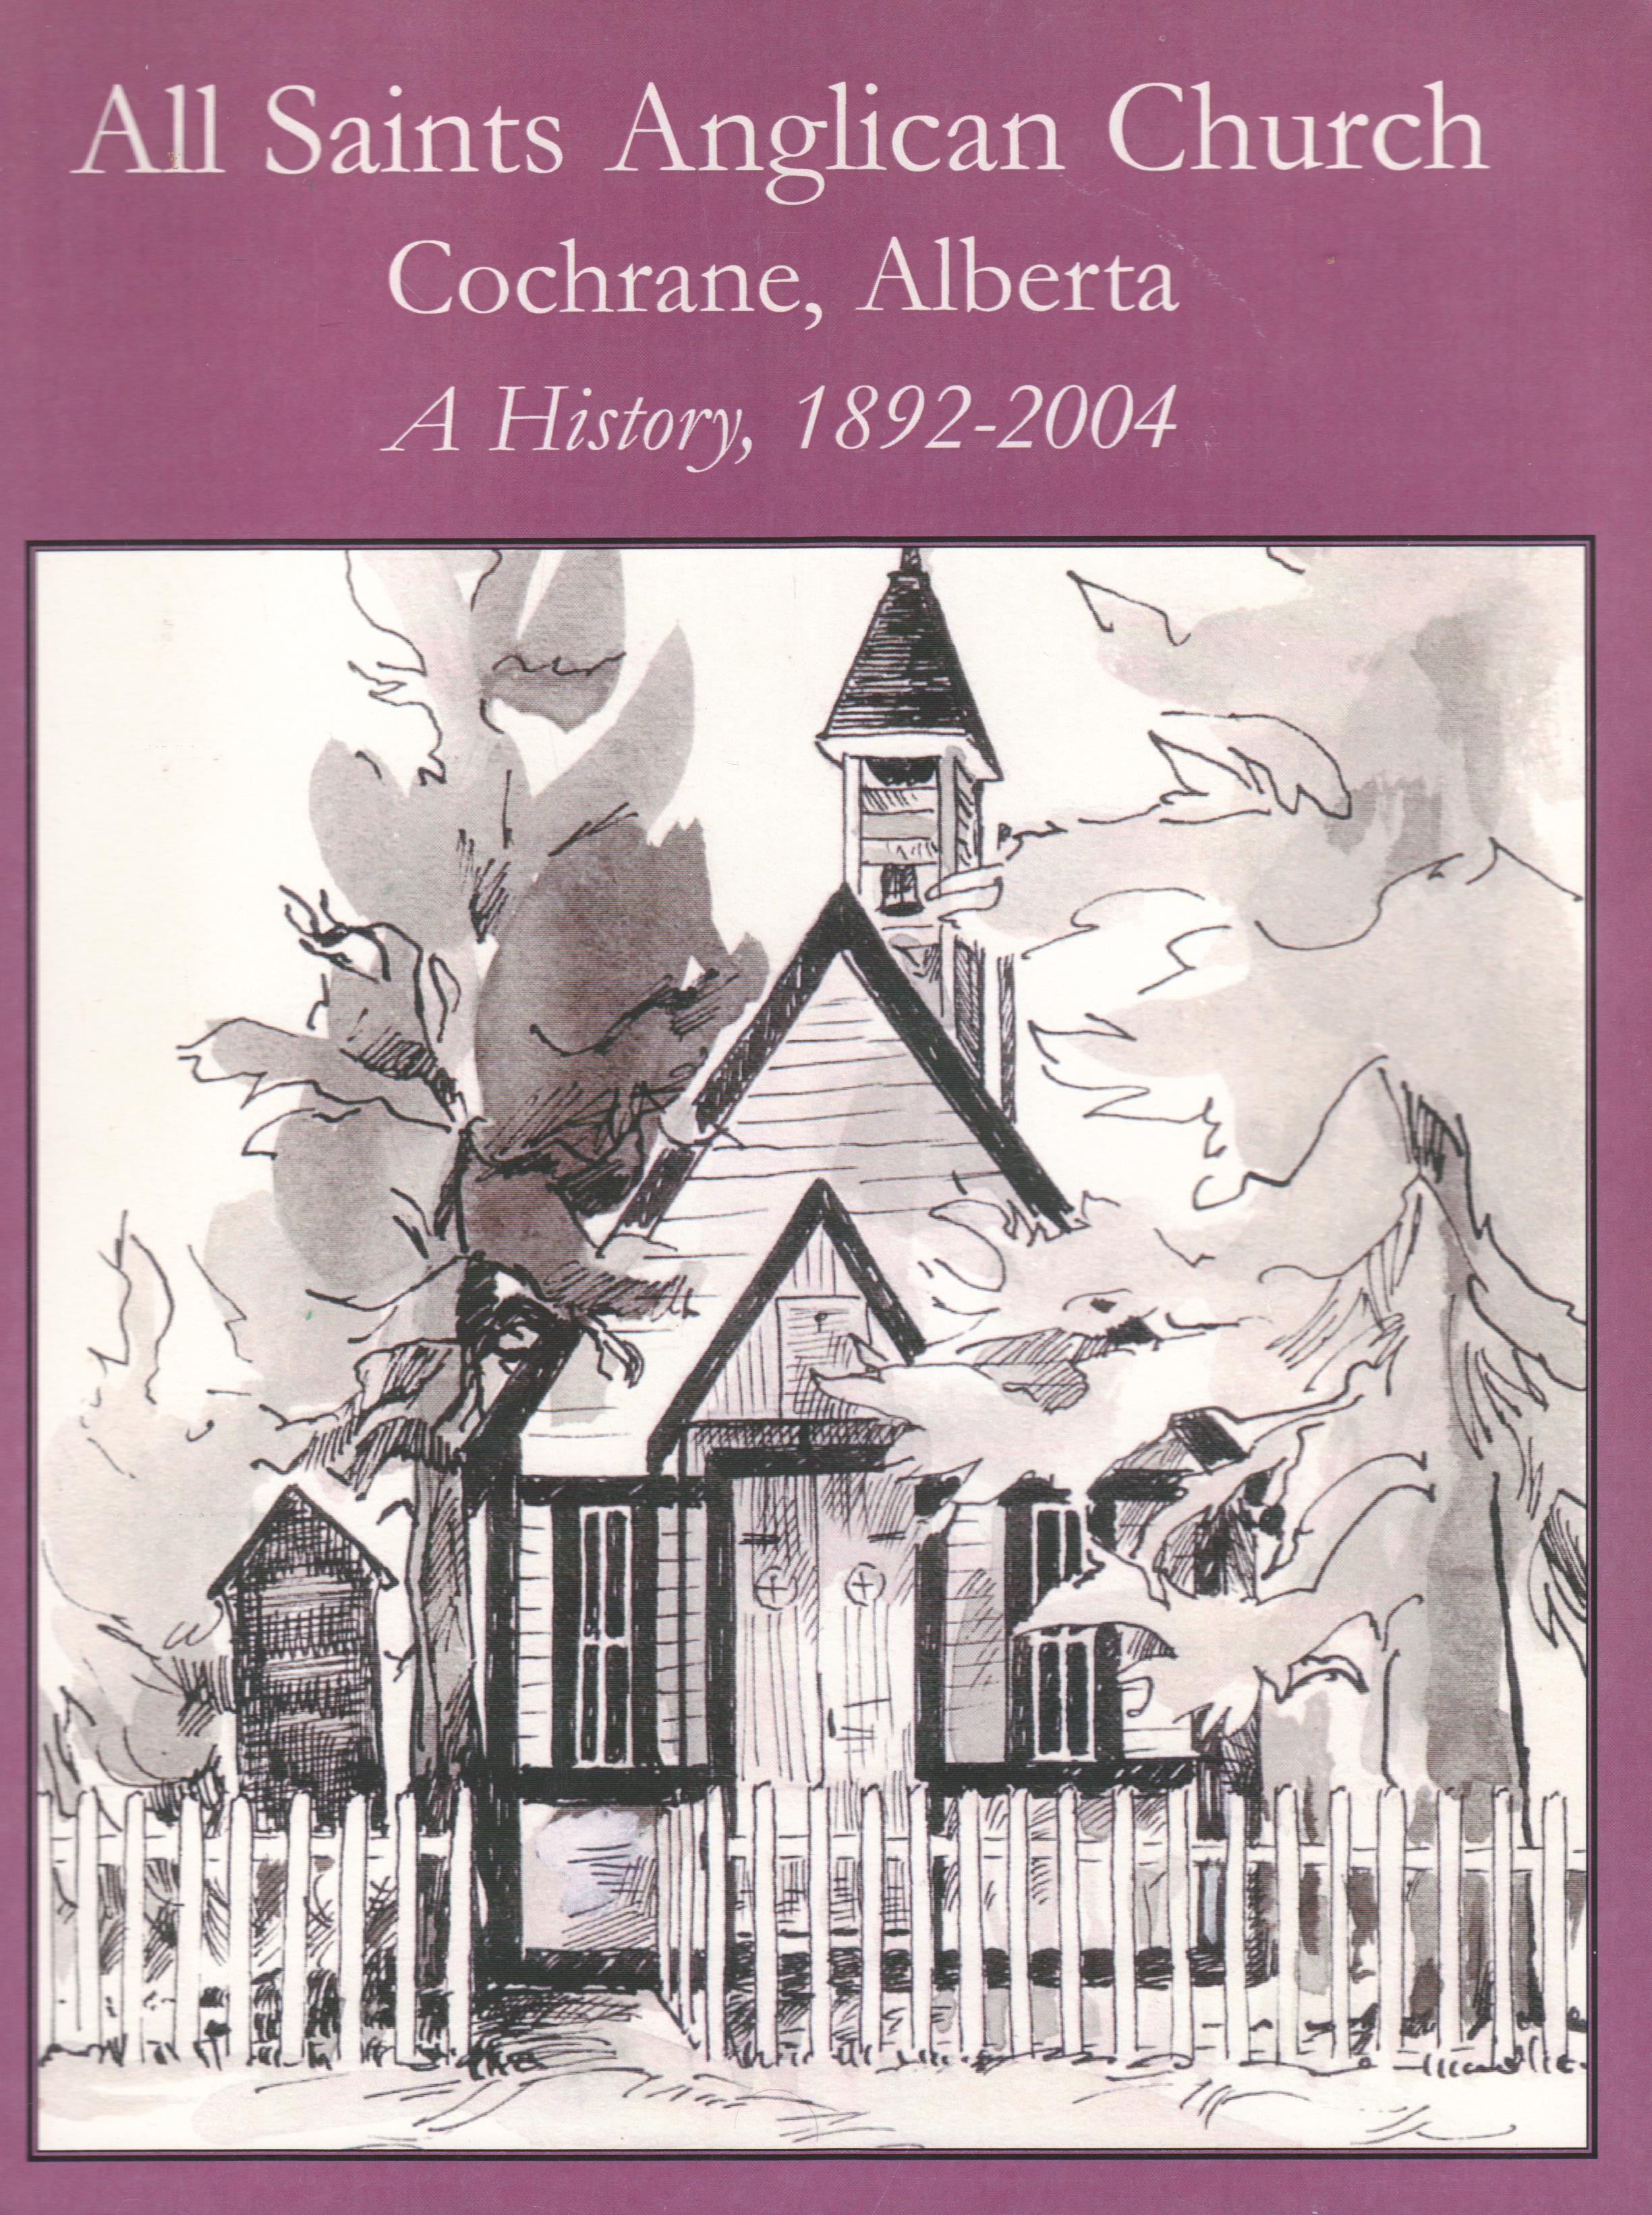 The original book cover from 2007